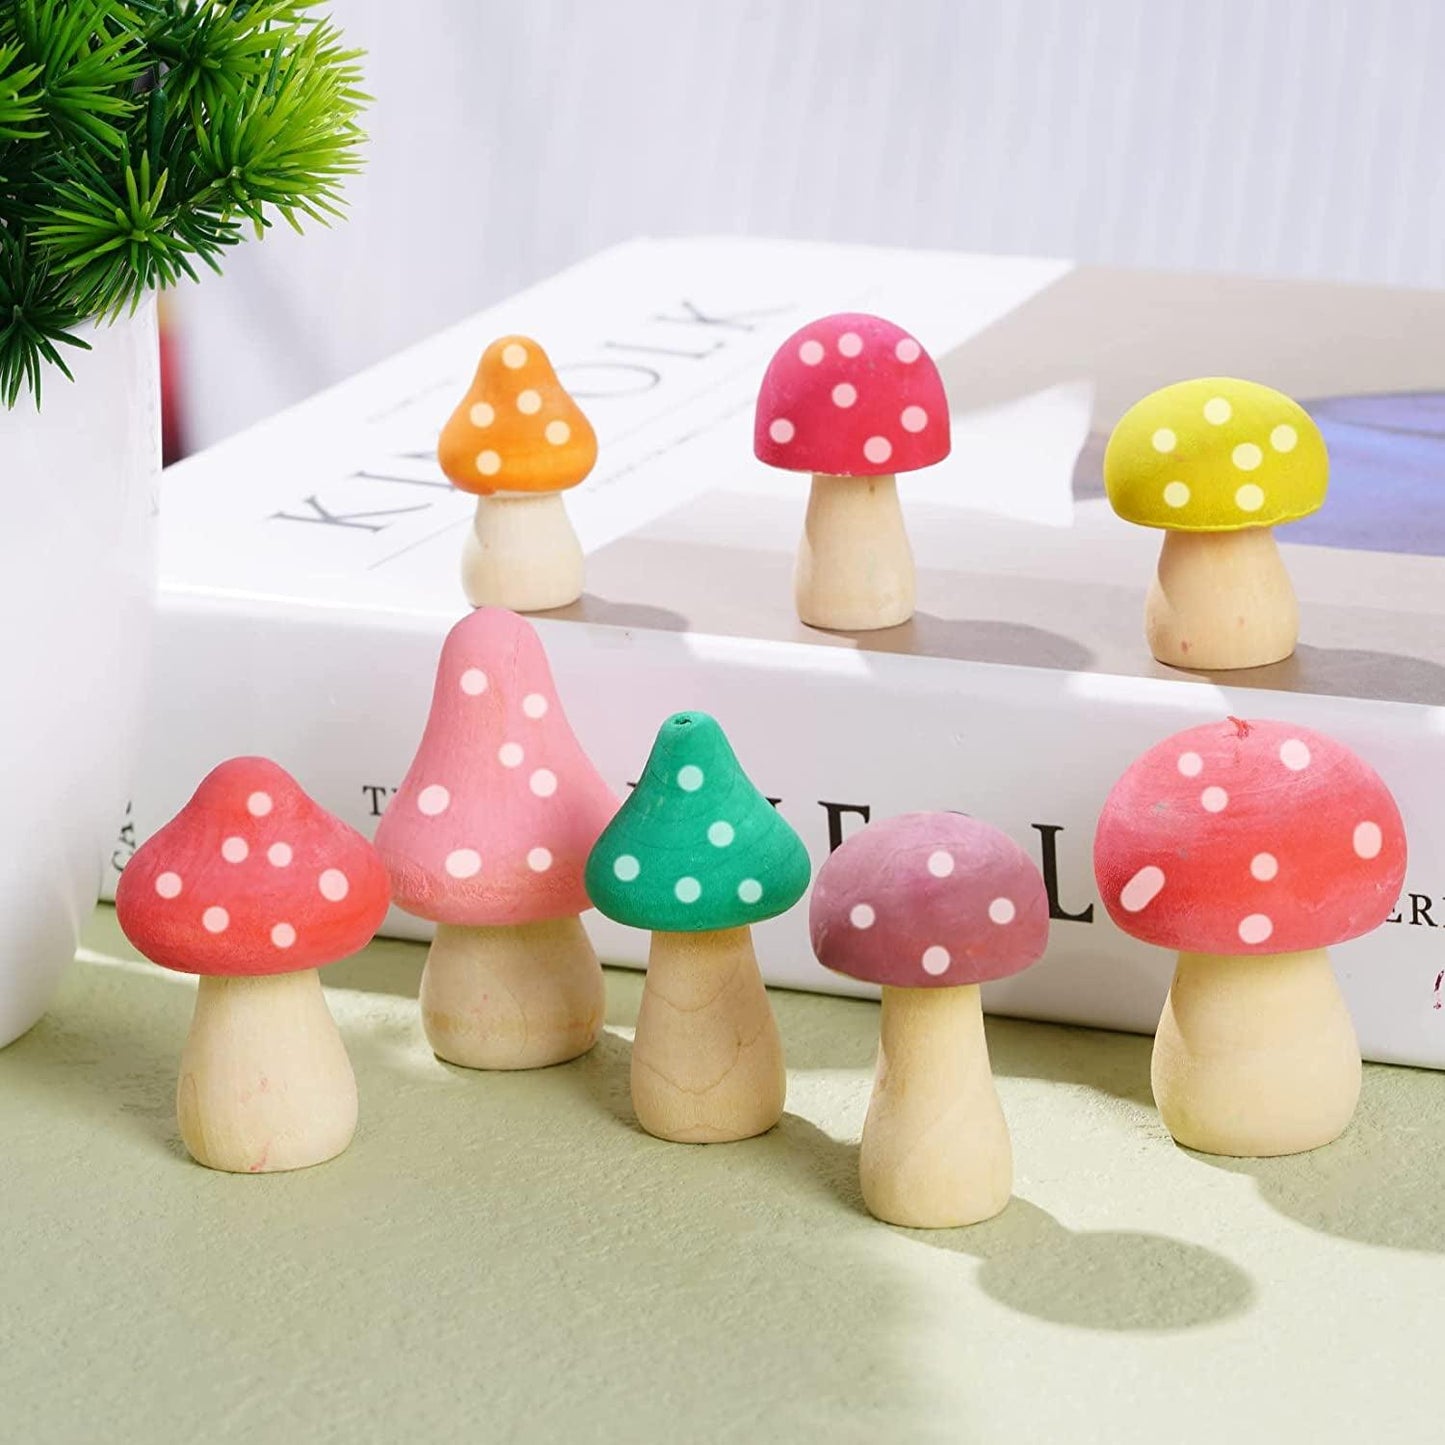 24 Pieces Unfinished Wooden Mushroom Mini Wood Mushrooms Natural Unpainted Wood for Arts and Crafts Projects - WoodArtSupply